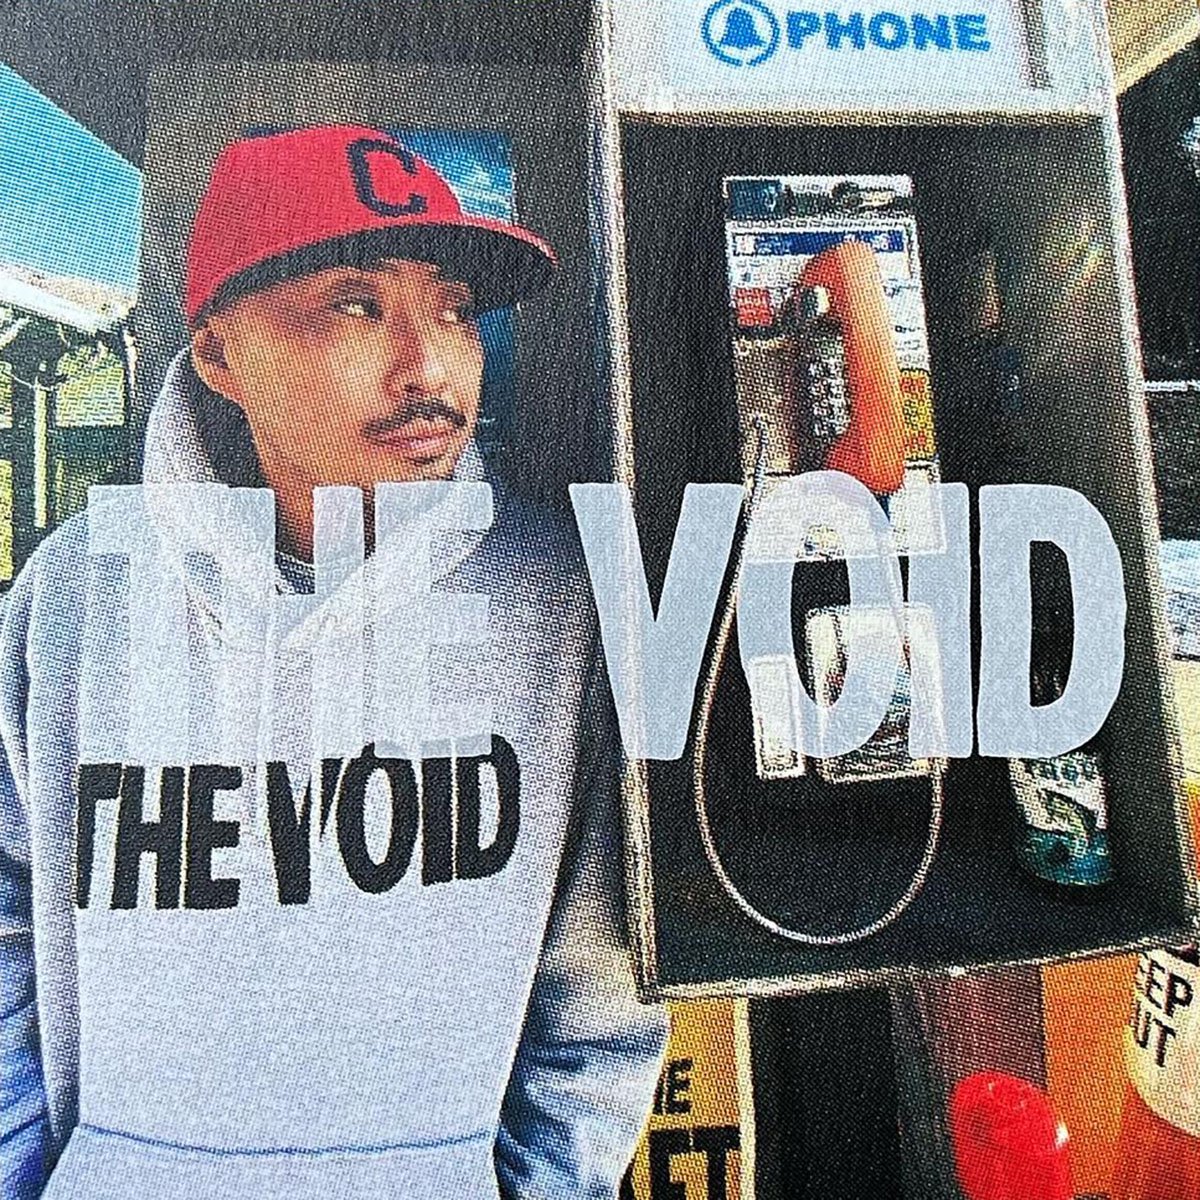 Fedup | HIPHOP WEAR | <img class='new_mark_img1' src='https://img.shop-pro.jp/img/new/icons30.gif' style='border:none;display:inline;margin:0px;padding:0px;width:auto;' />DJ CRONOSFADER  / THE VOID PT.5